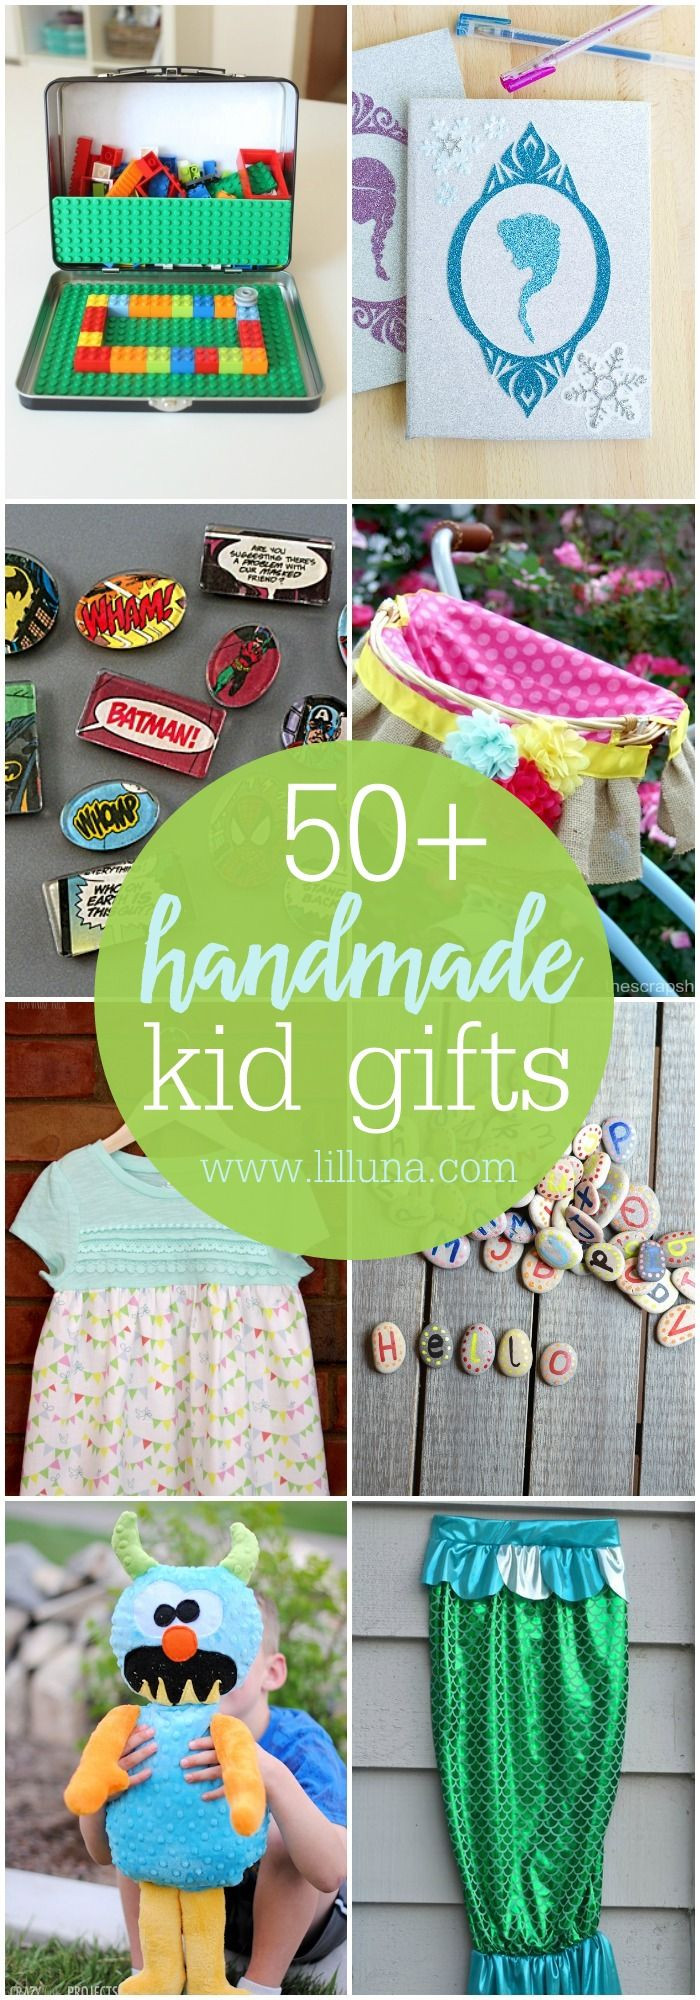 Cheap Kids Gifts
 50 Handmade Gift ideas for Kids so many great ideas to